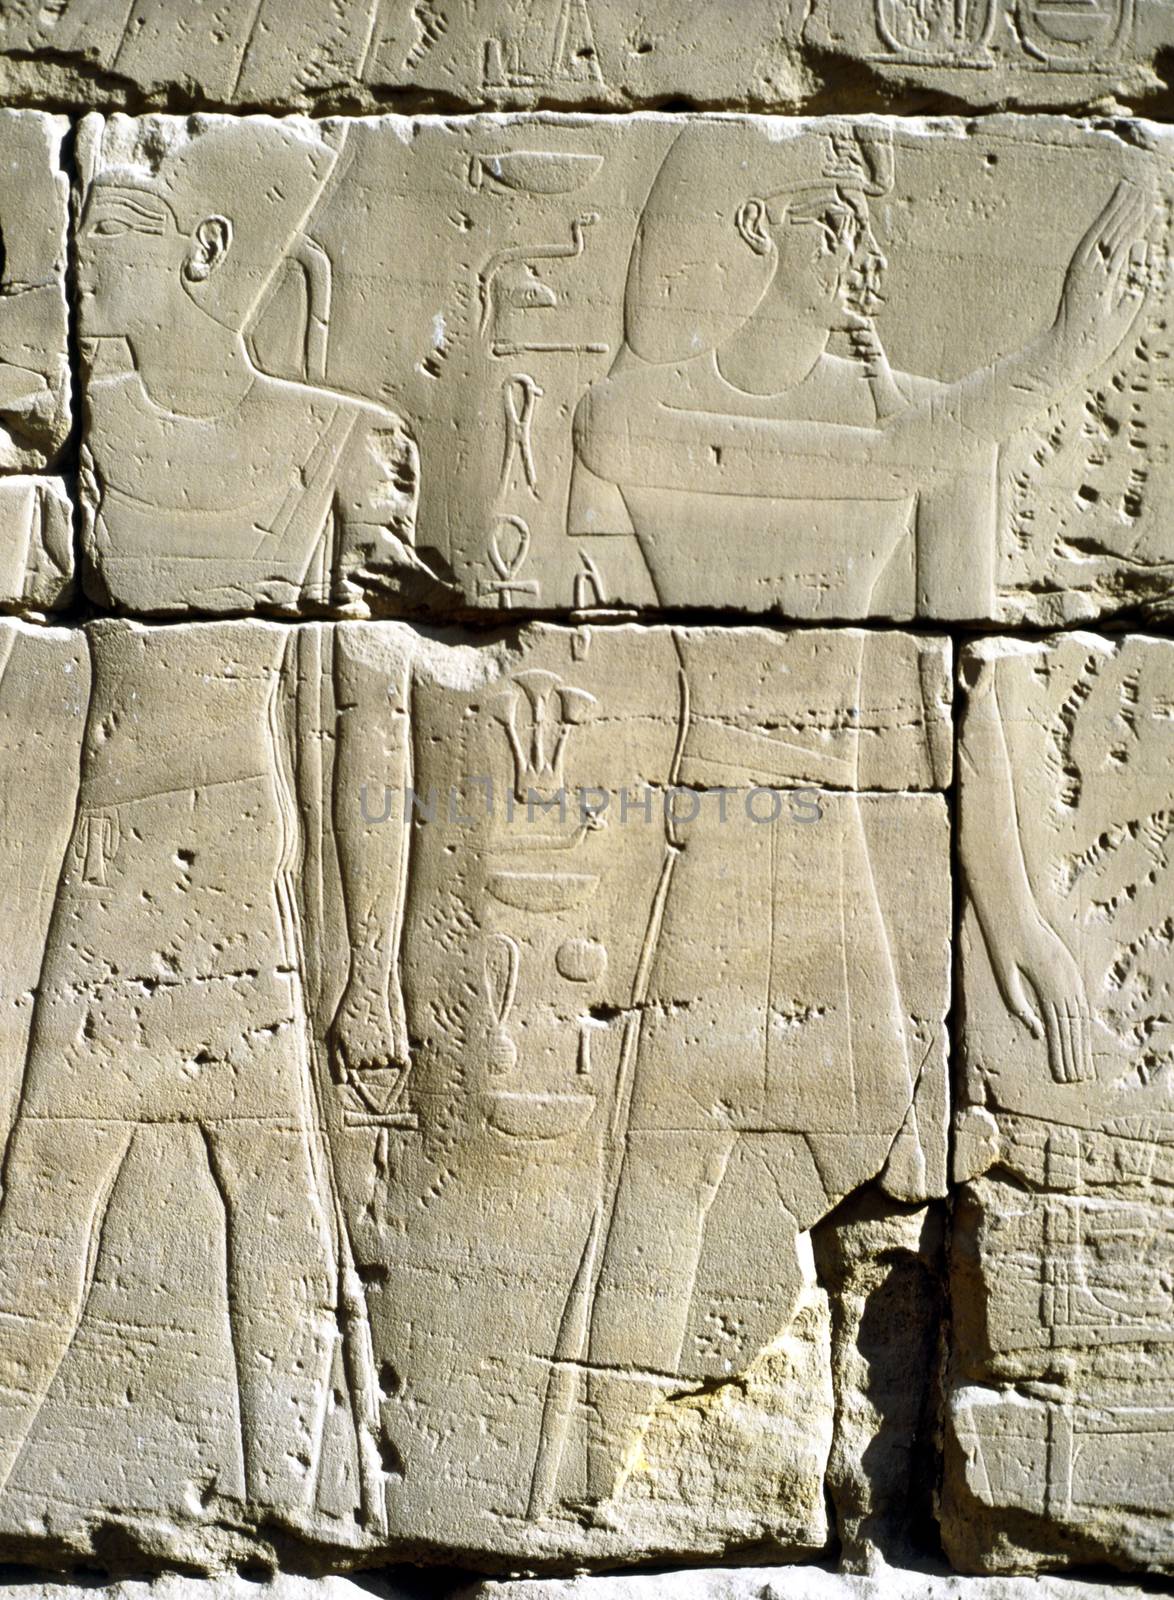 Relief in Luxor, Egypt by jol66